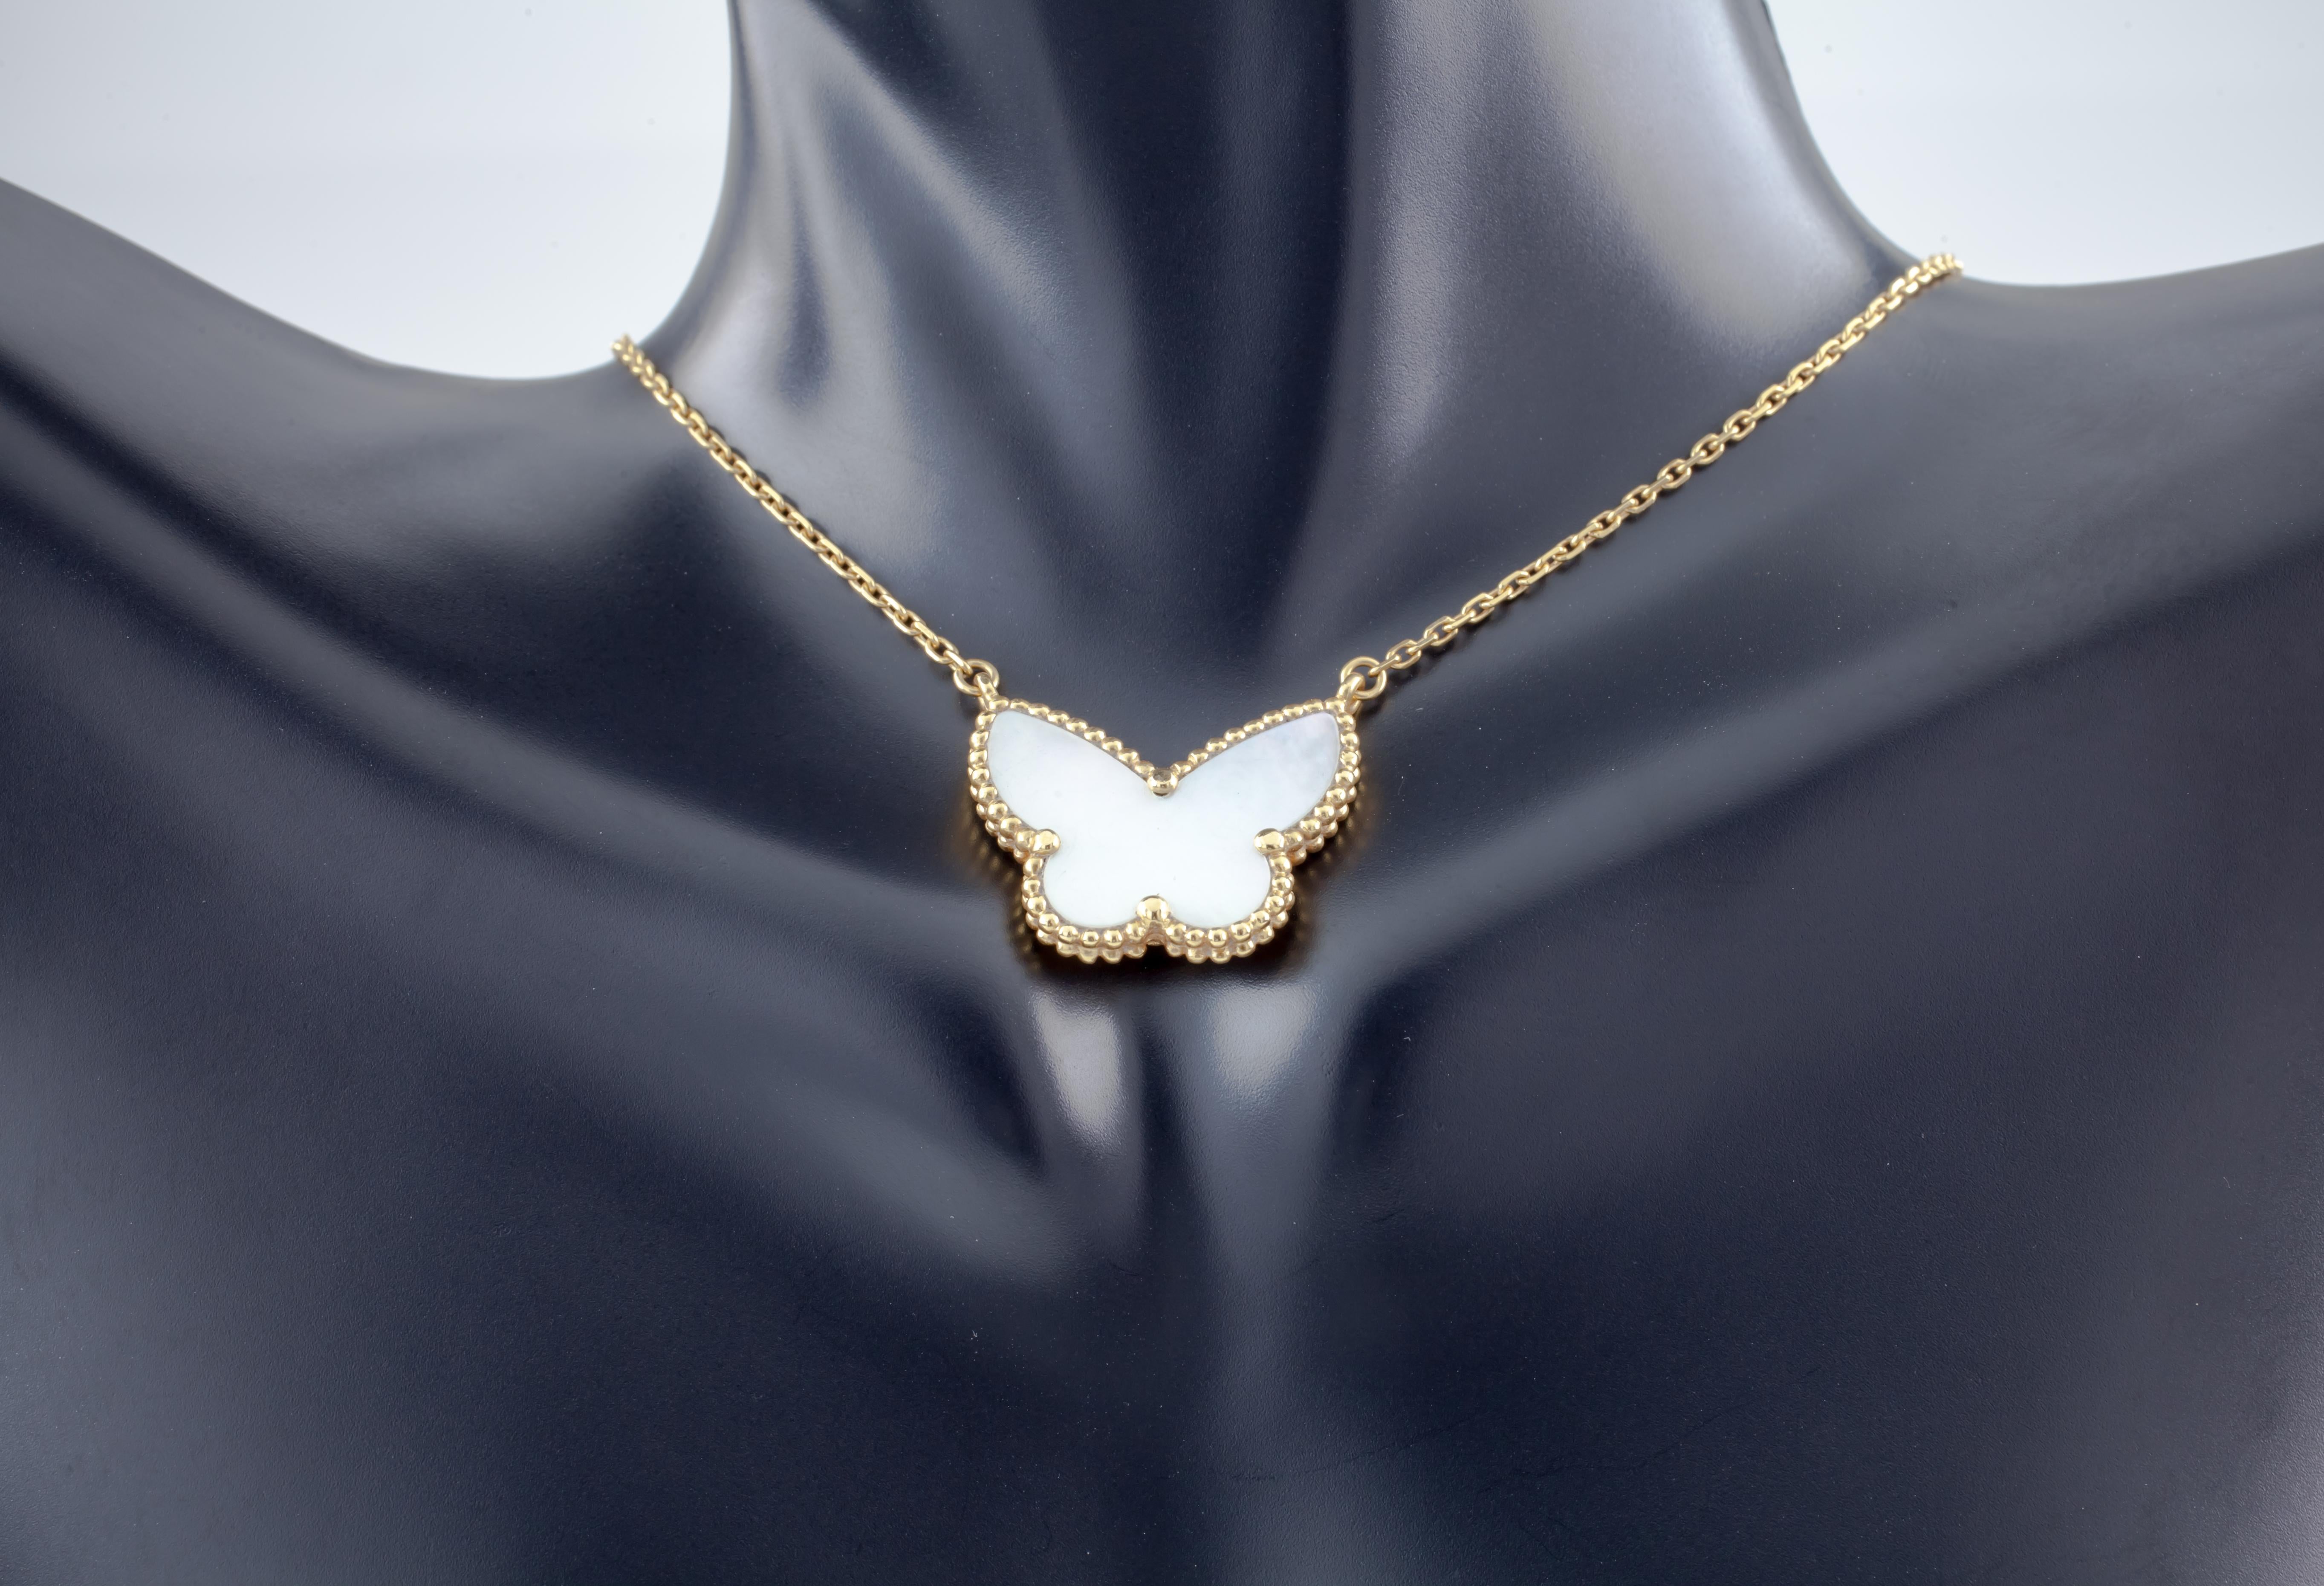 Gorgeous Van Cleef & Arpels Alhambra Butterfly Pendant
Lucky Size (21 mm wide, 16 mm long)
Includes 16